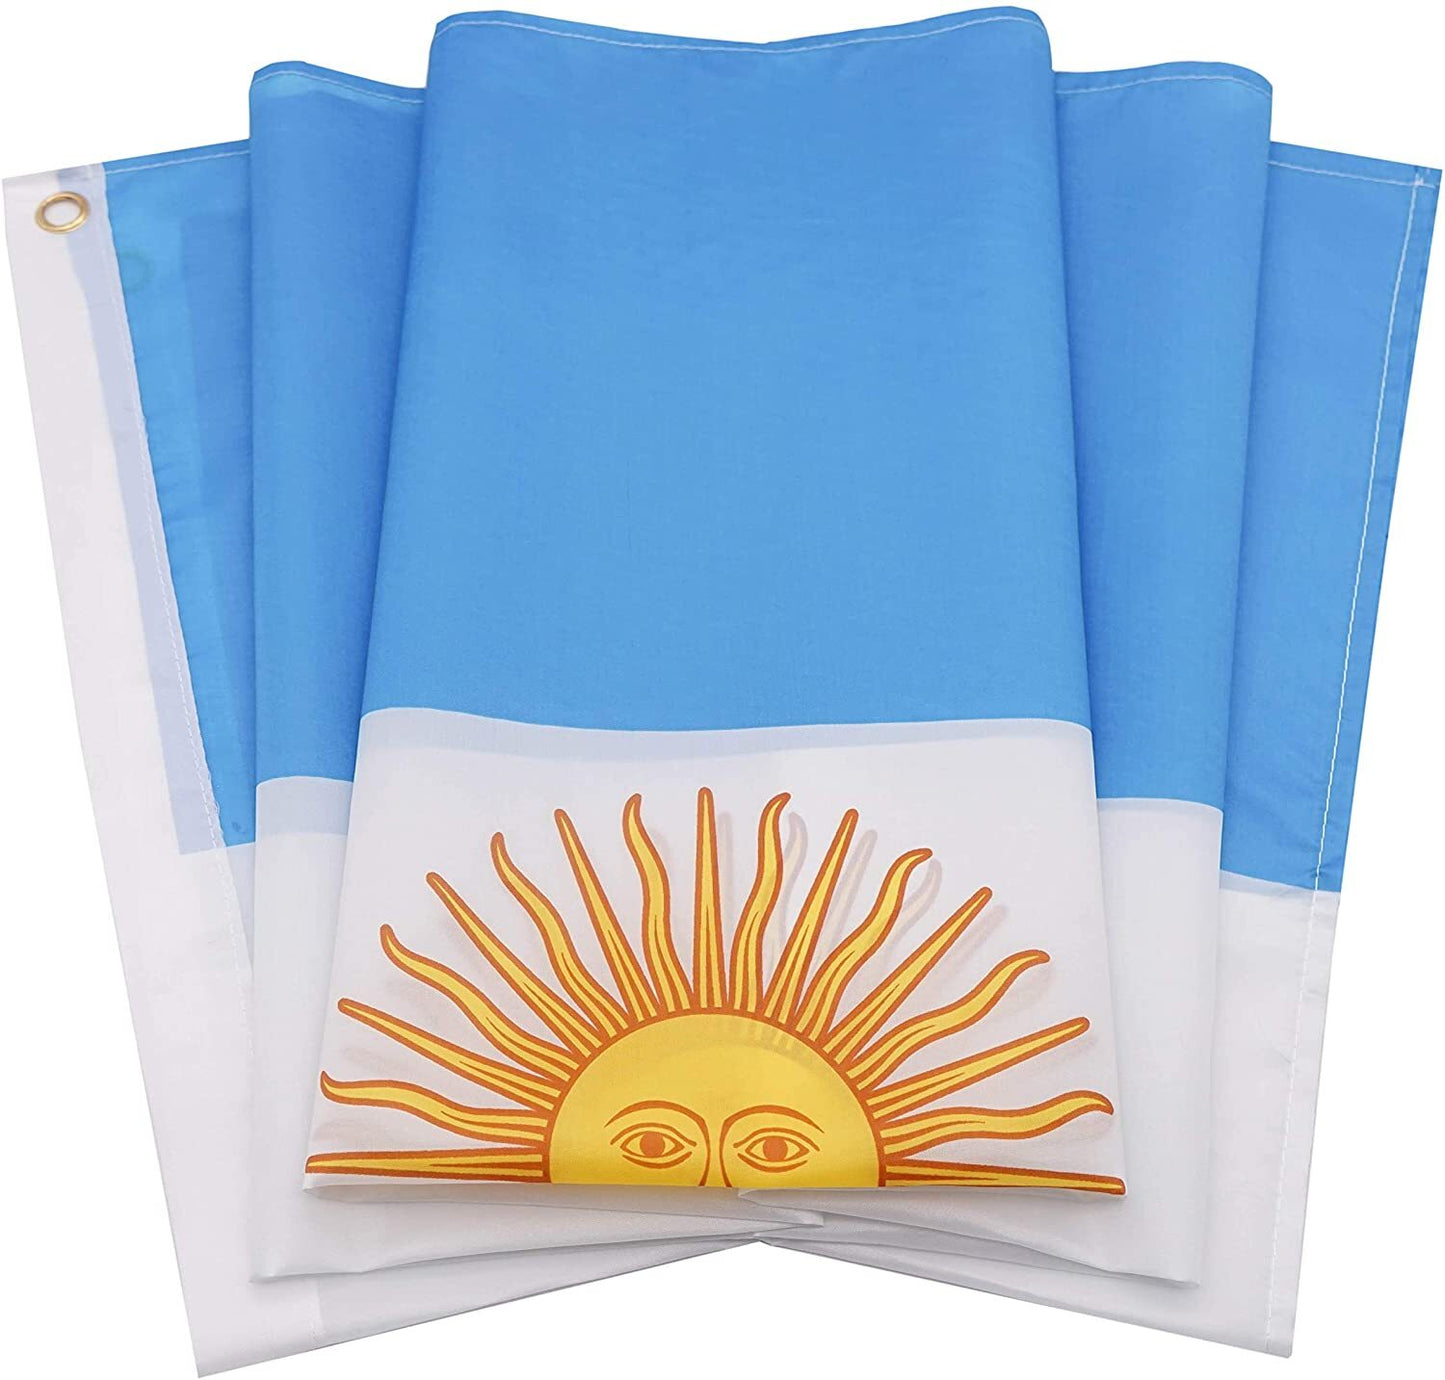 Large Argentina Argentinian Flag Heavy Duty Outdoor 90 X 150 CM - 3ft x 5ft - Homeware Discounts